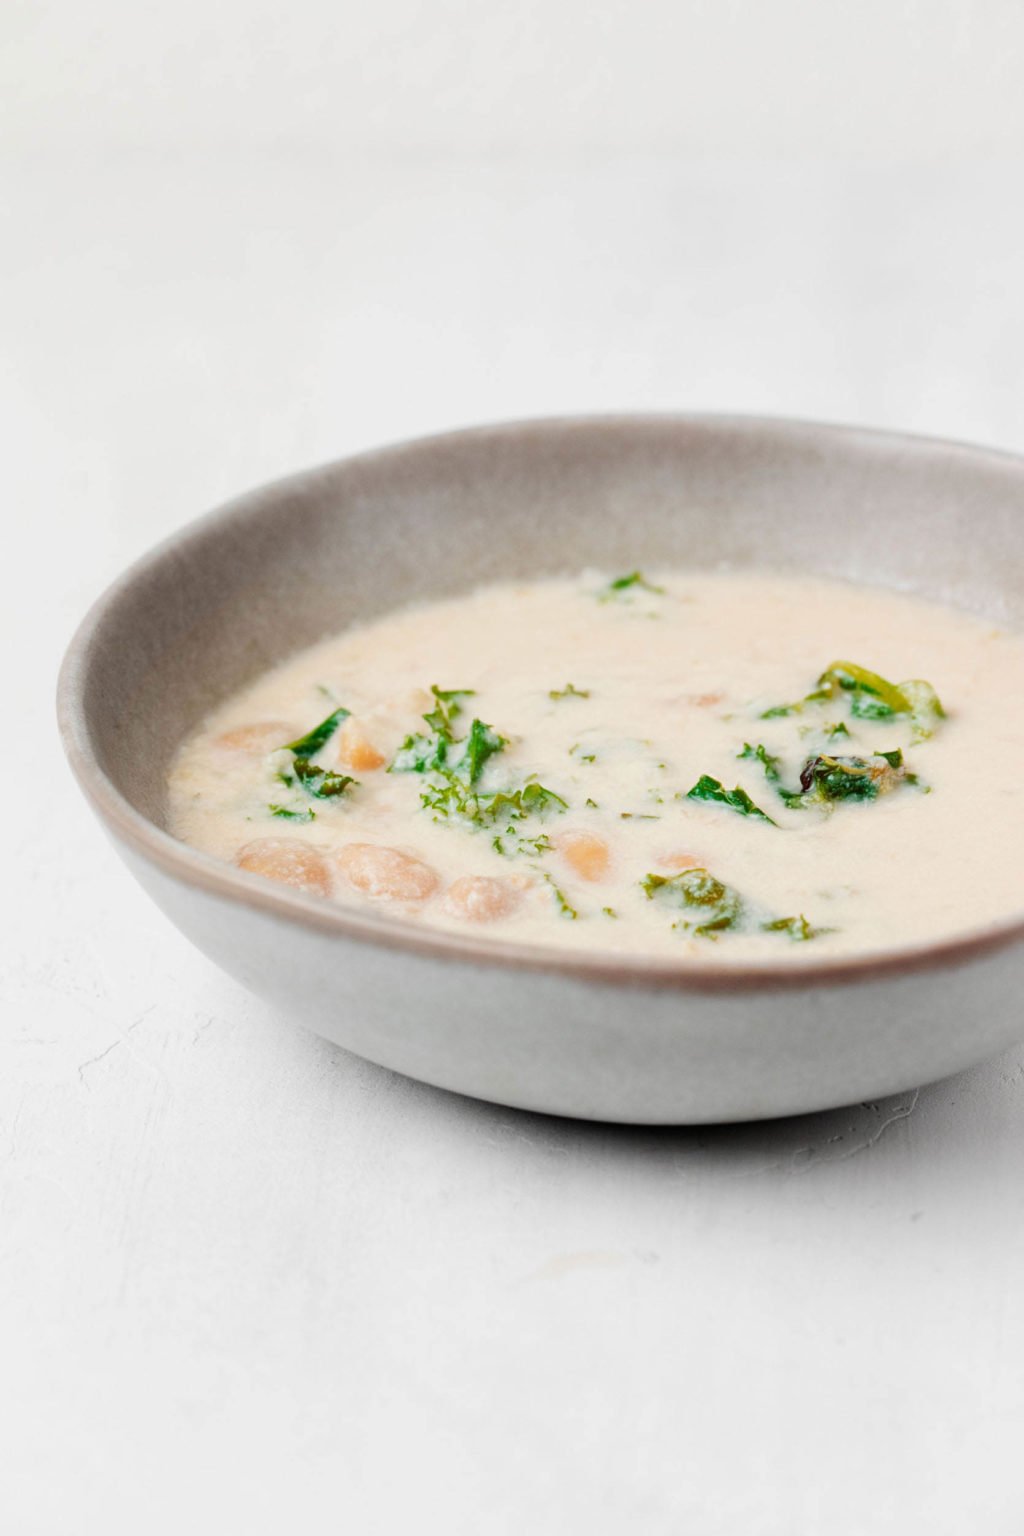 An angled photograph of a light gray, ceramic bowl. It's filled with a creamy mixture of legumes and greens. It rests on a white surface.